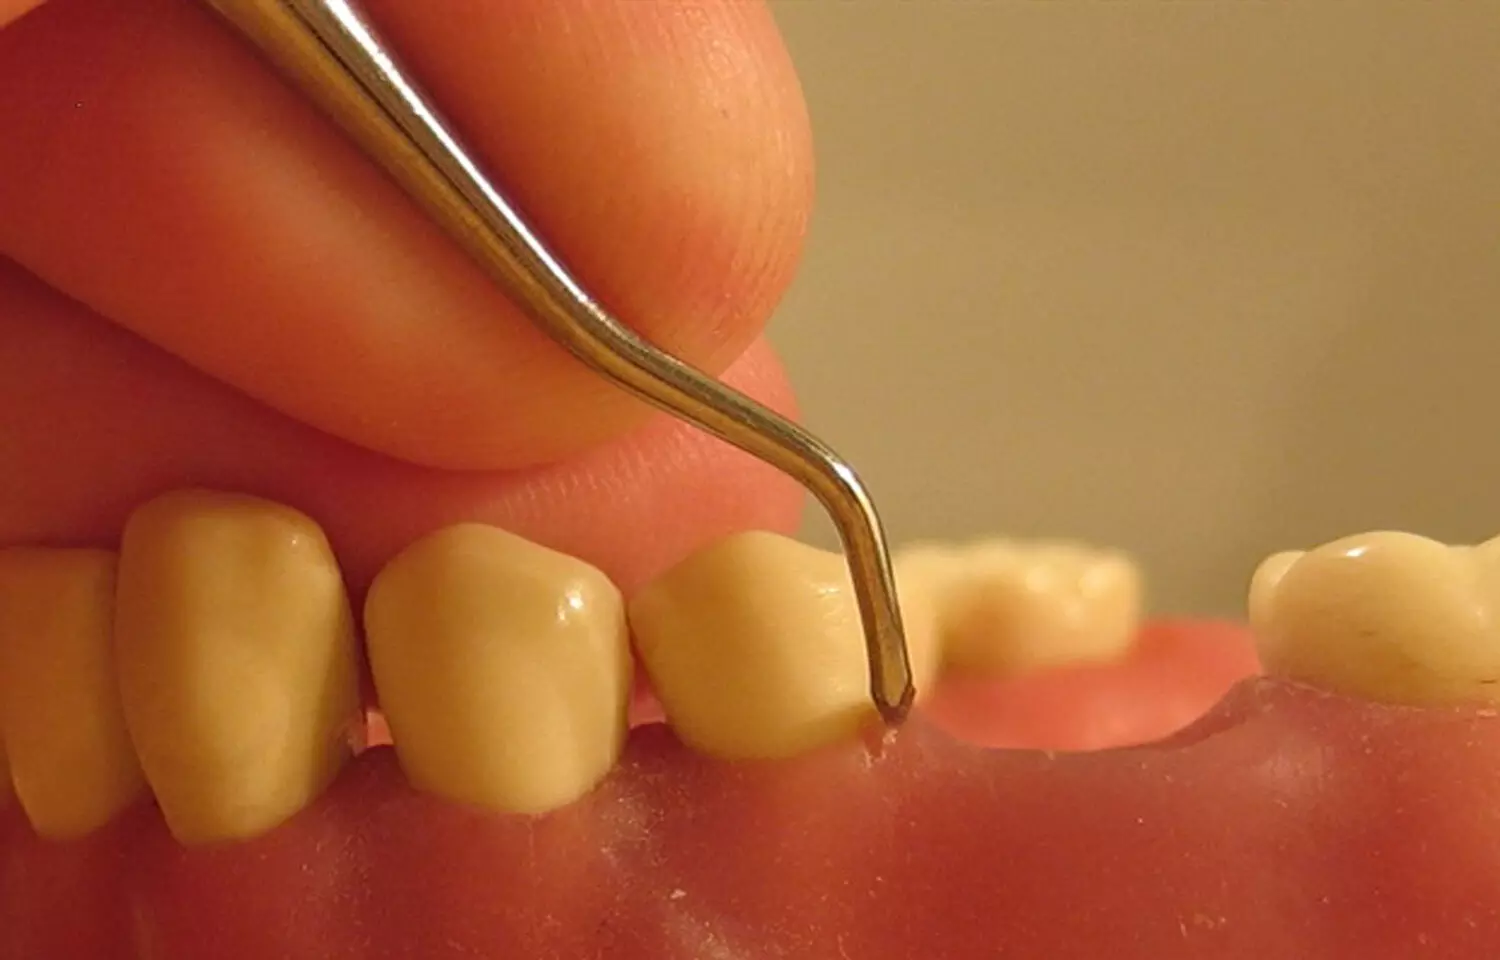 Molecules derived from omega-3 can regenerate inflamed periodontal tissue